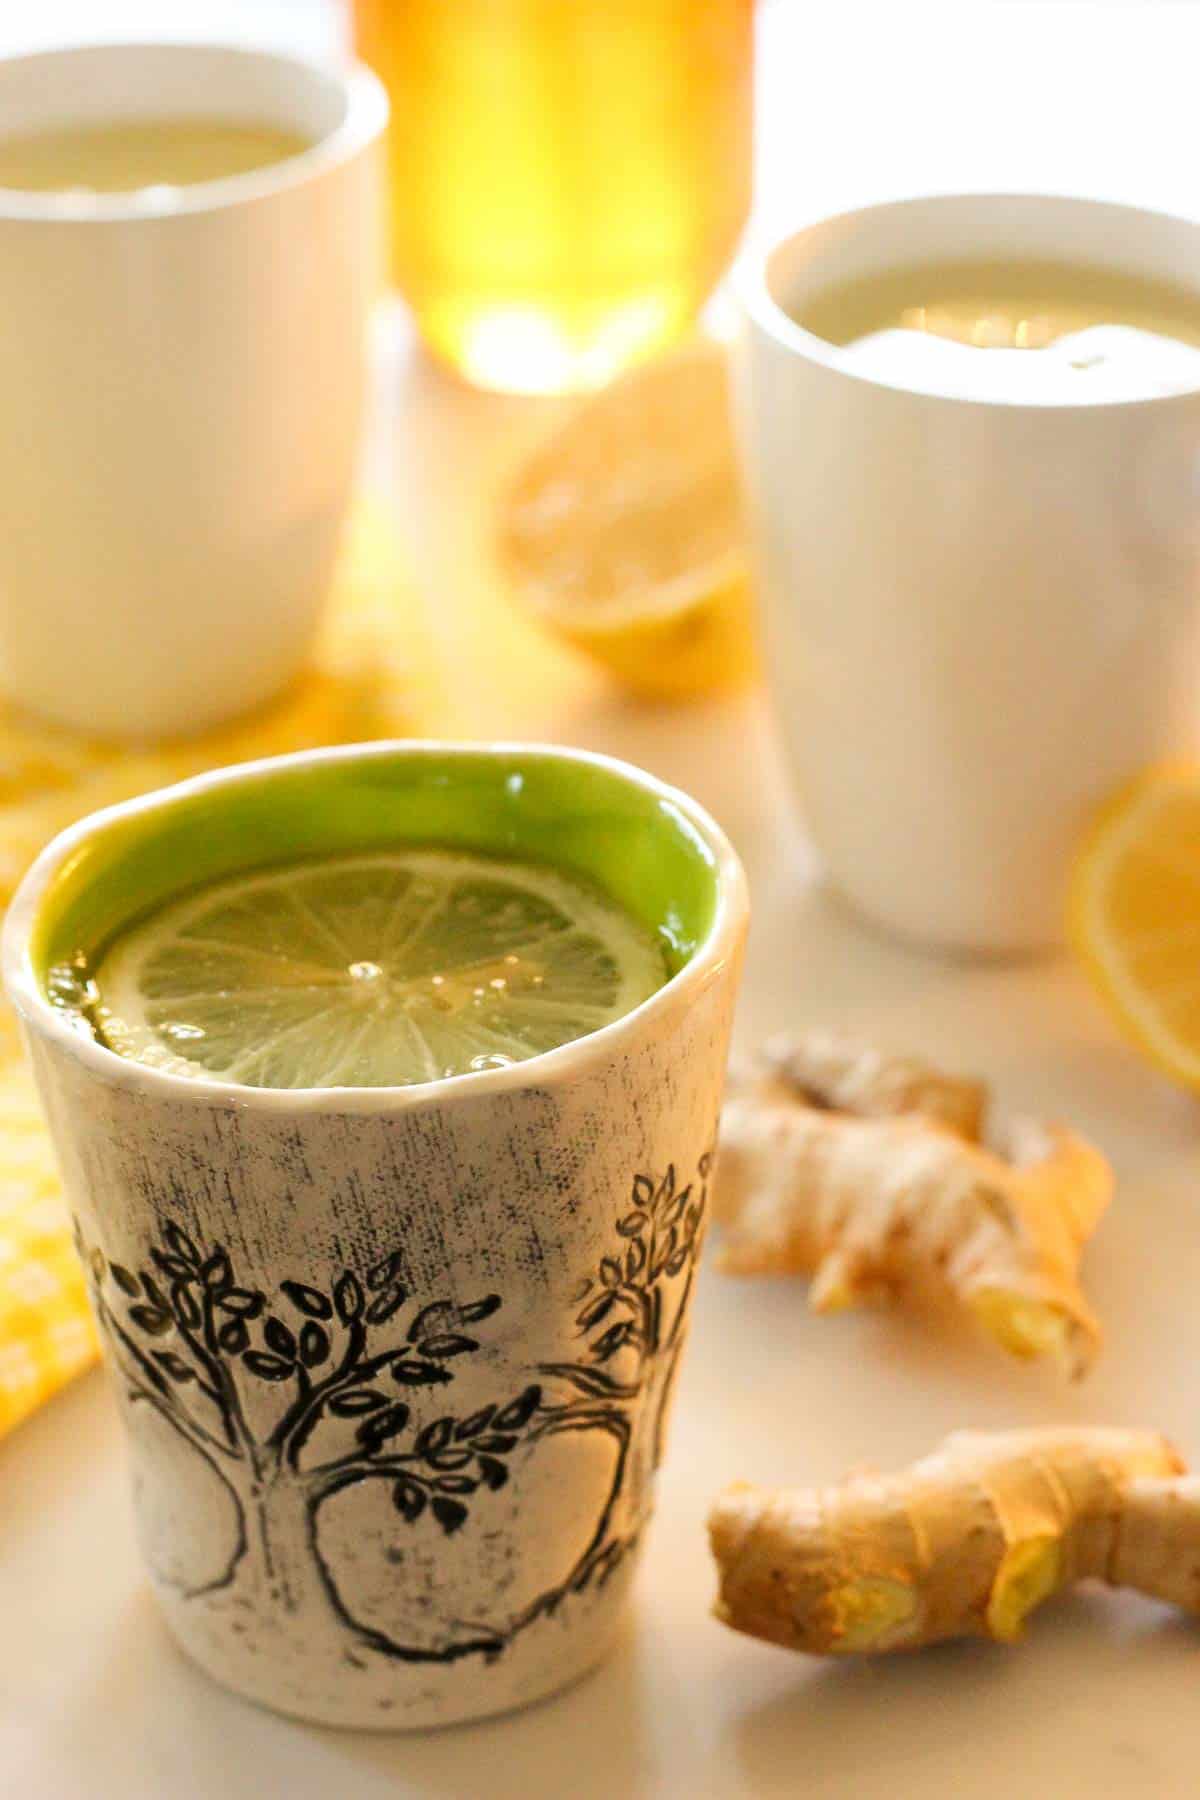 Pottery mugs of lemon ginger tea, with lemon slices, gingerroot and jar of honey in the background.